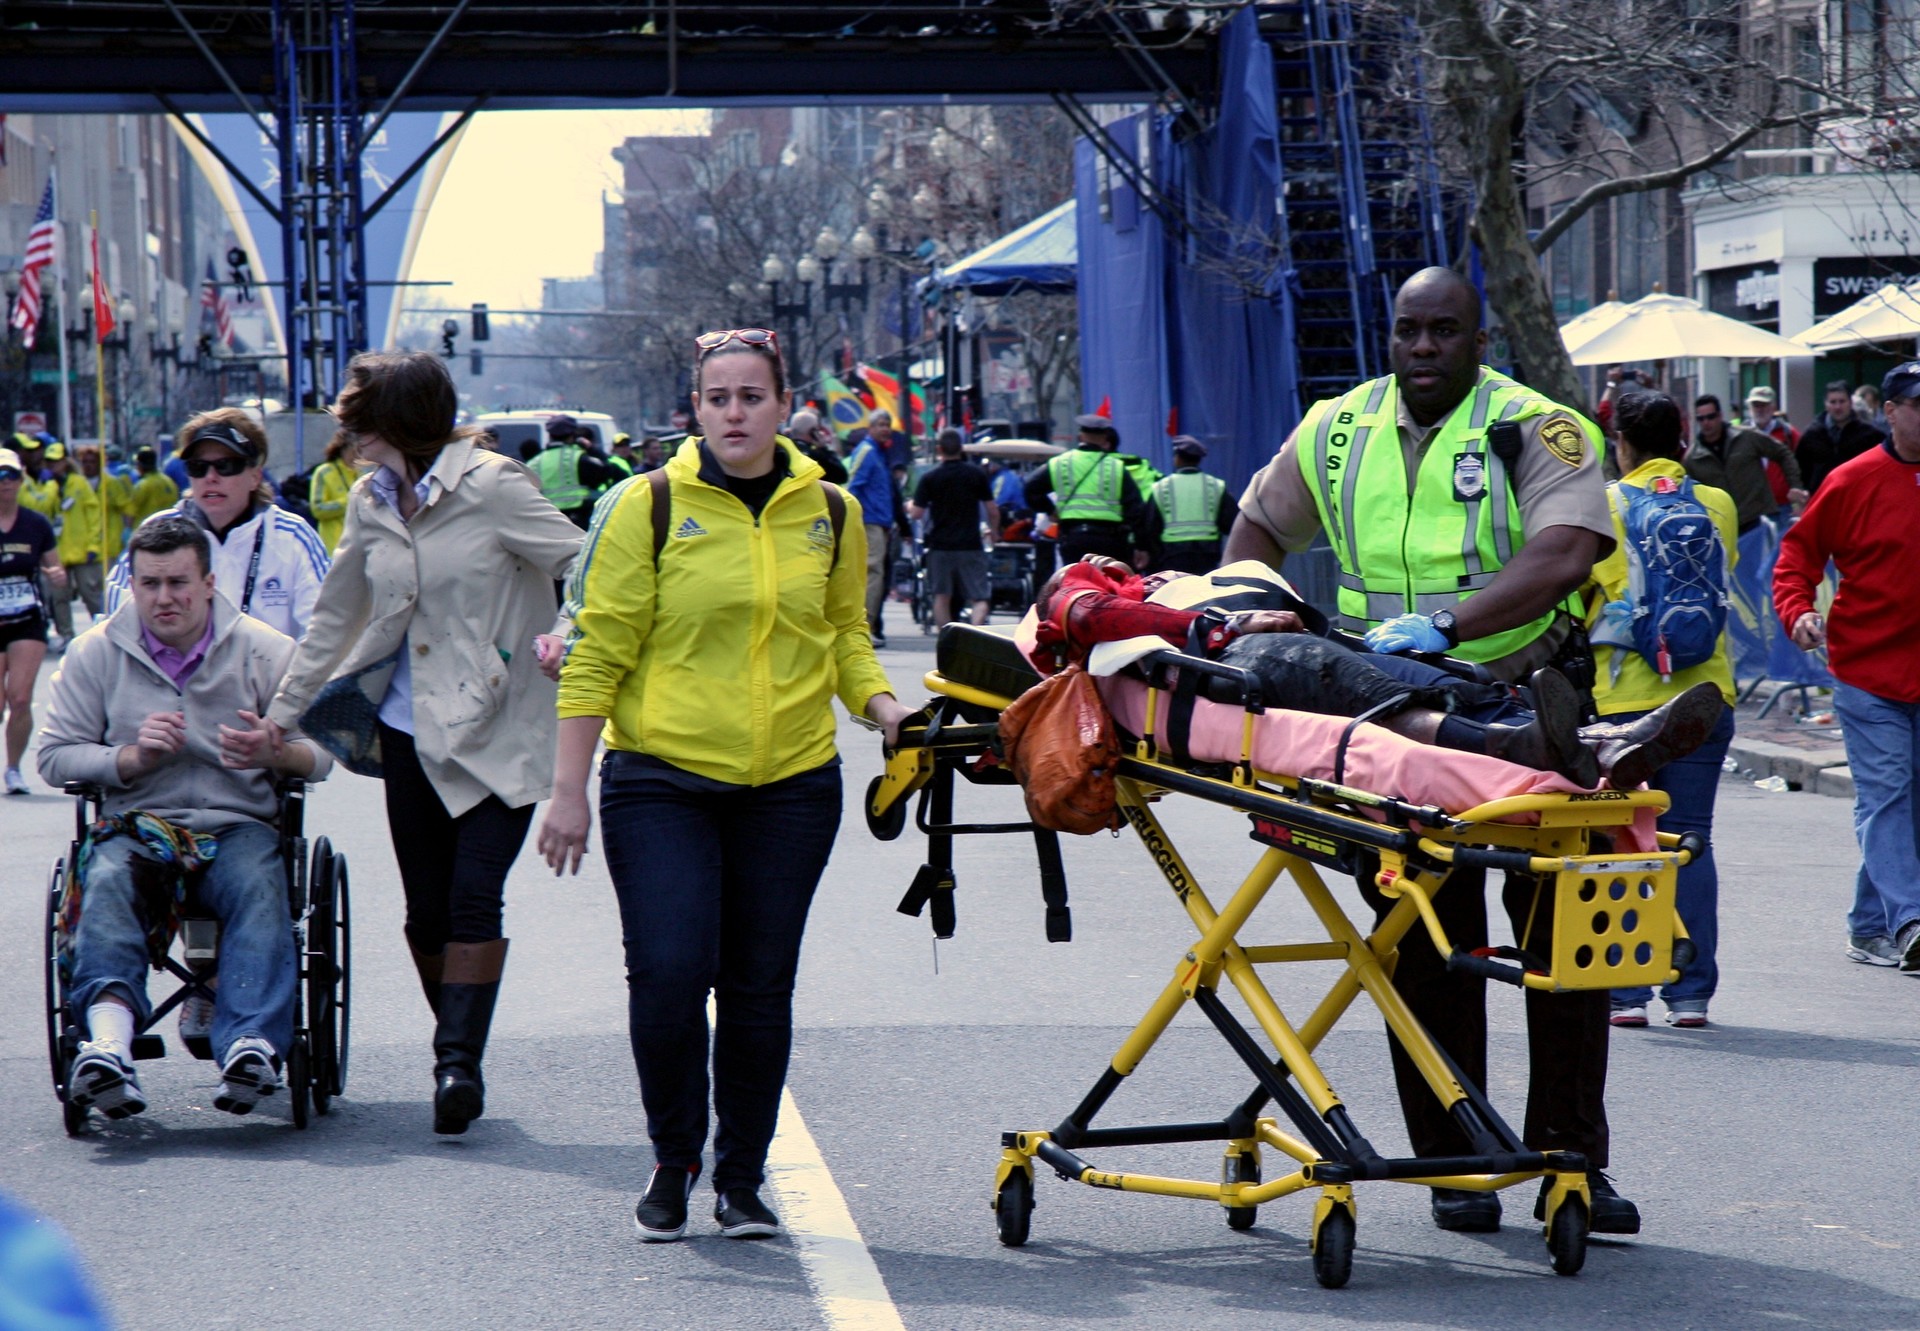 1920x1331 The 2013 Boston Marathon bombing wasn't as bad as it could have been, and  for that the official after-action report credits quick-acting medical  responders ...